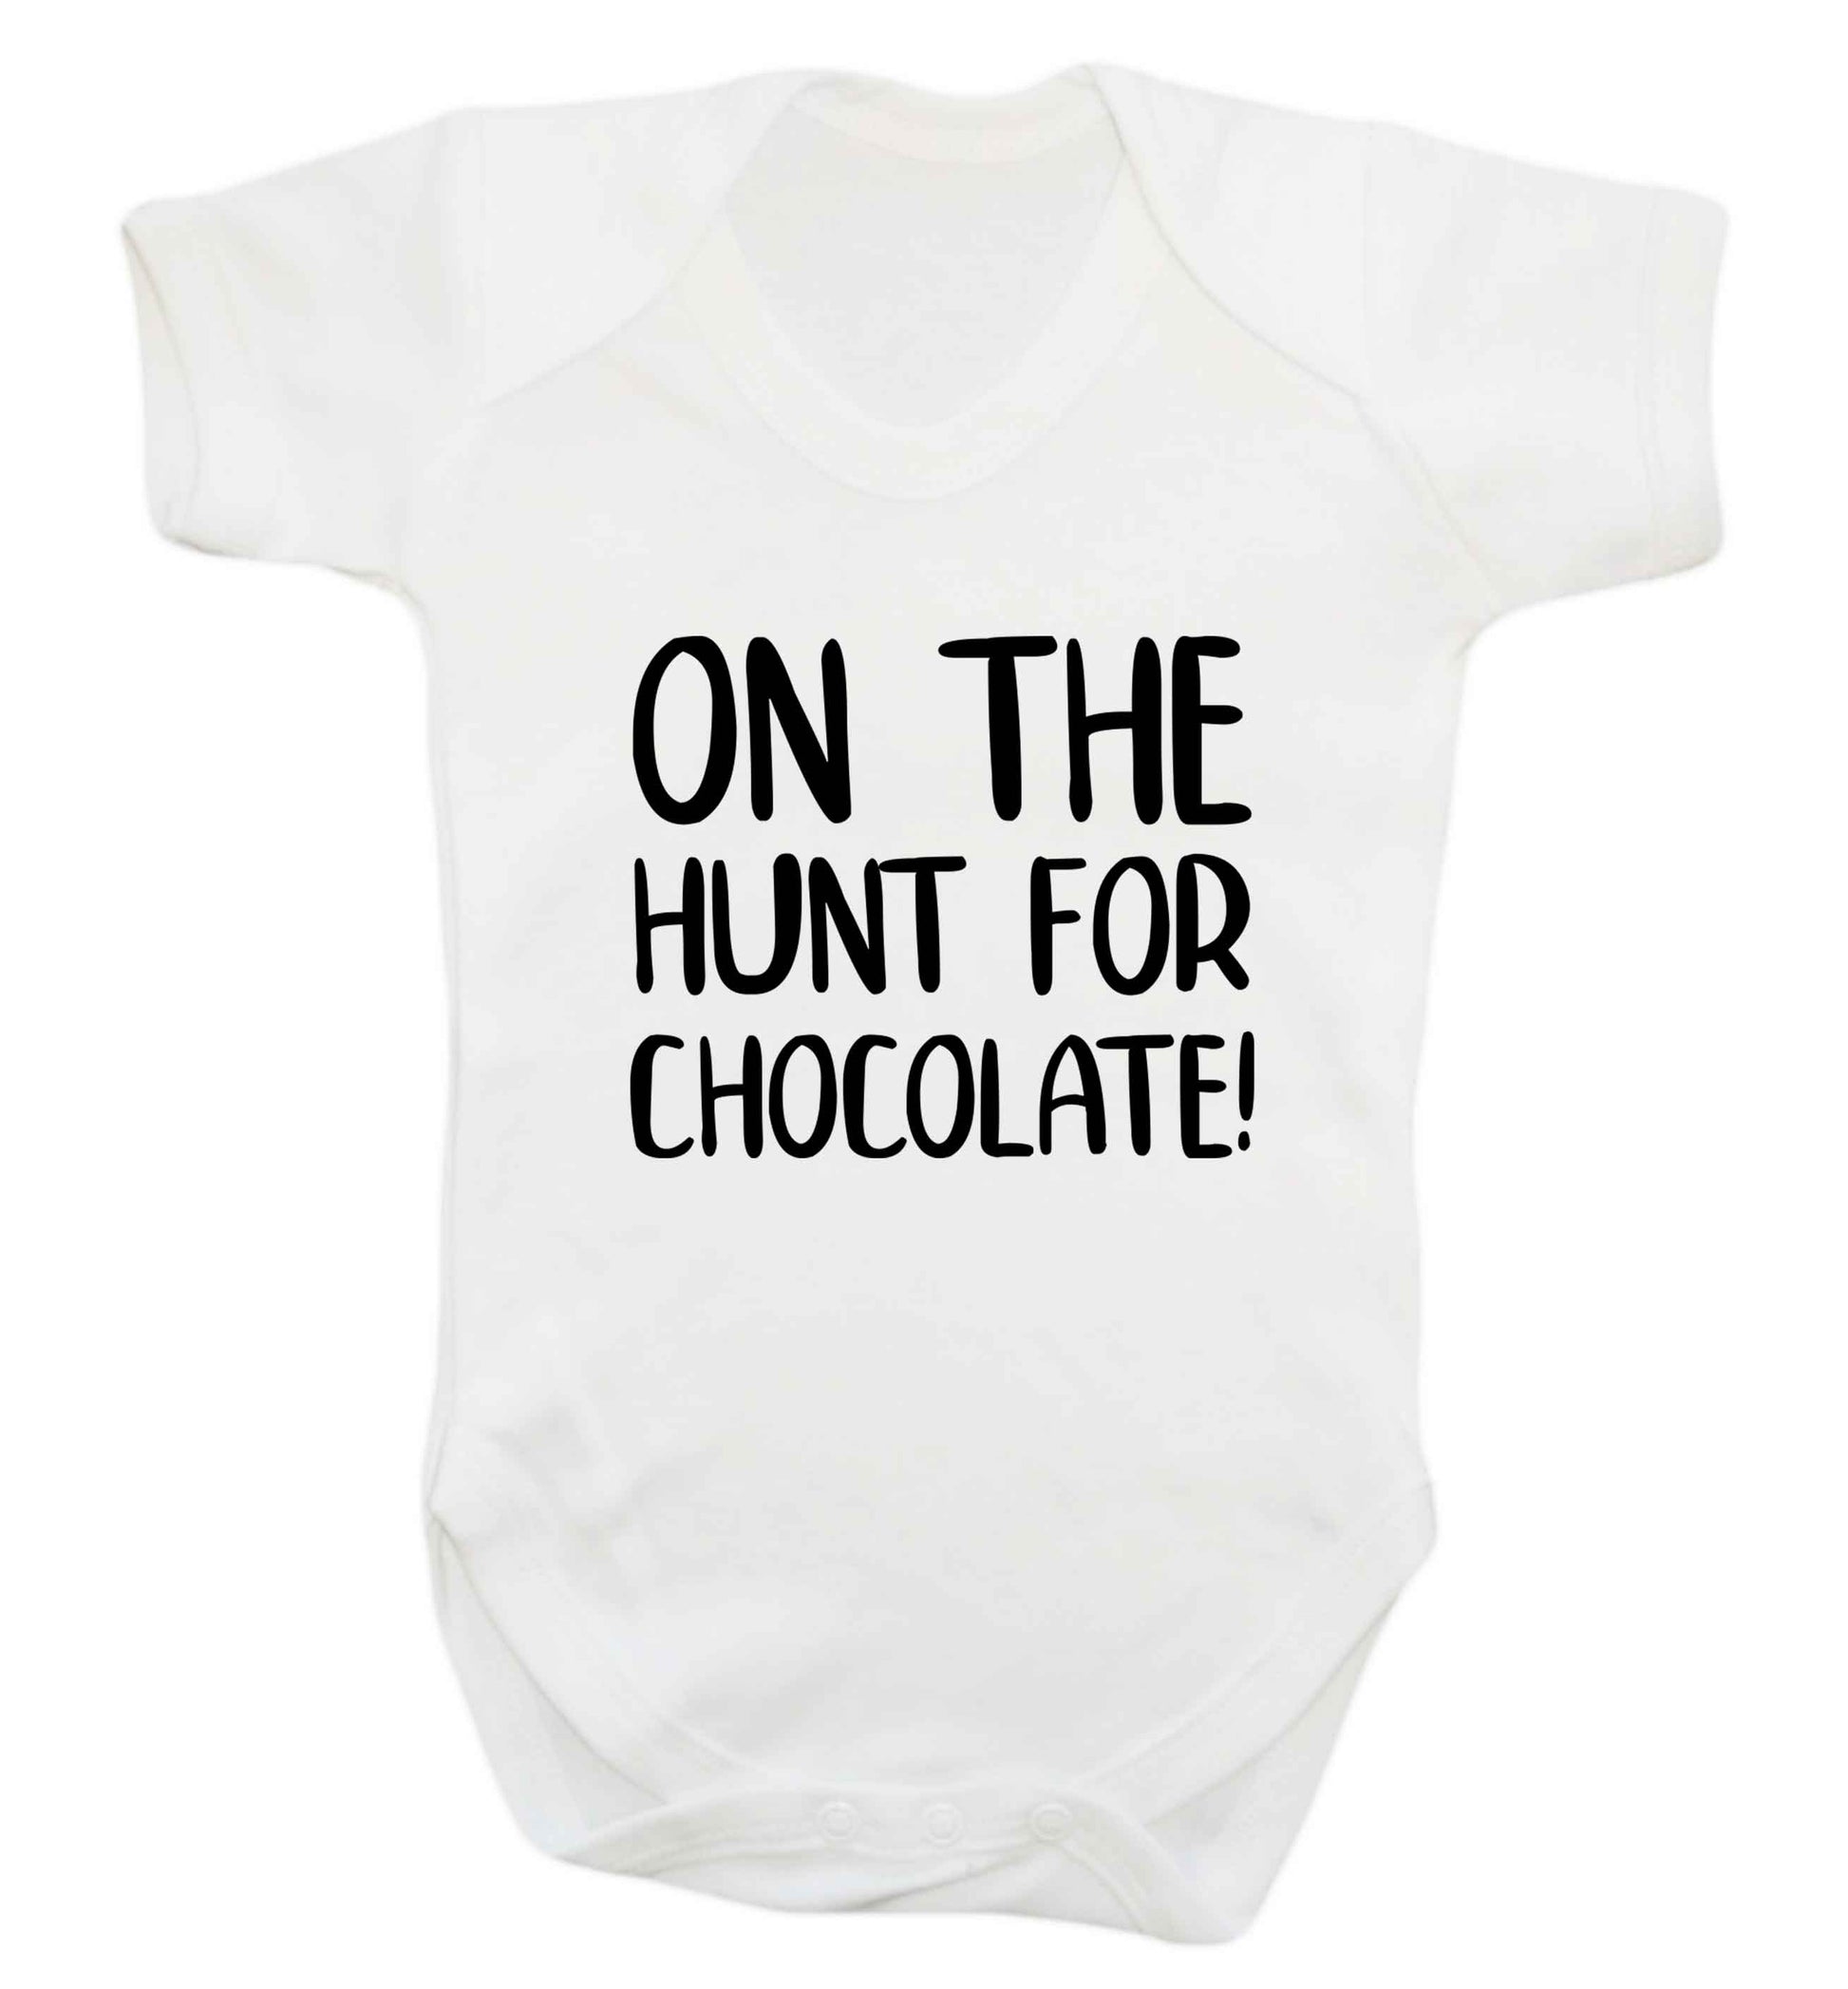 On the hunt for chocolate! baby vest white 18-24 months